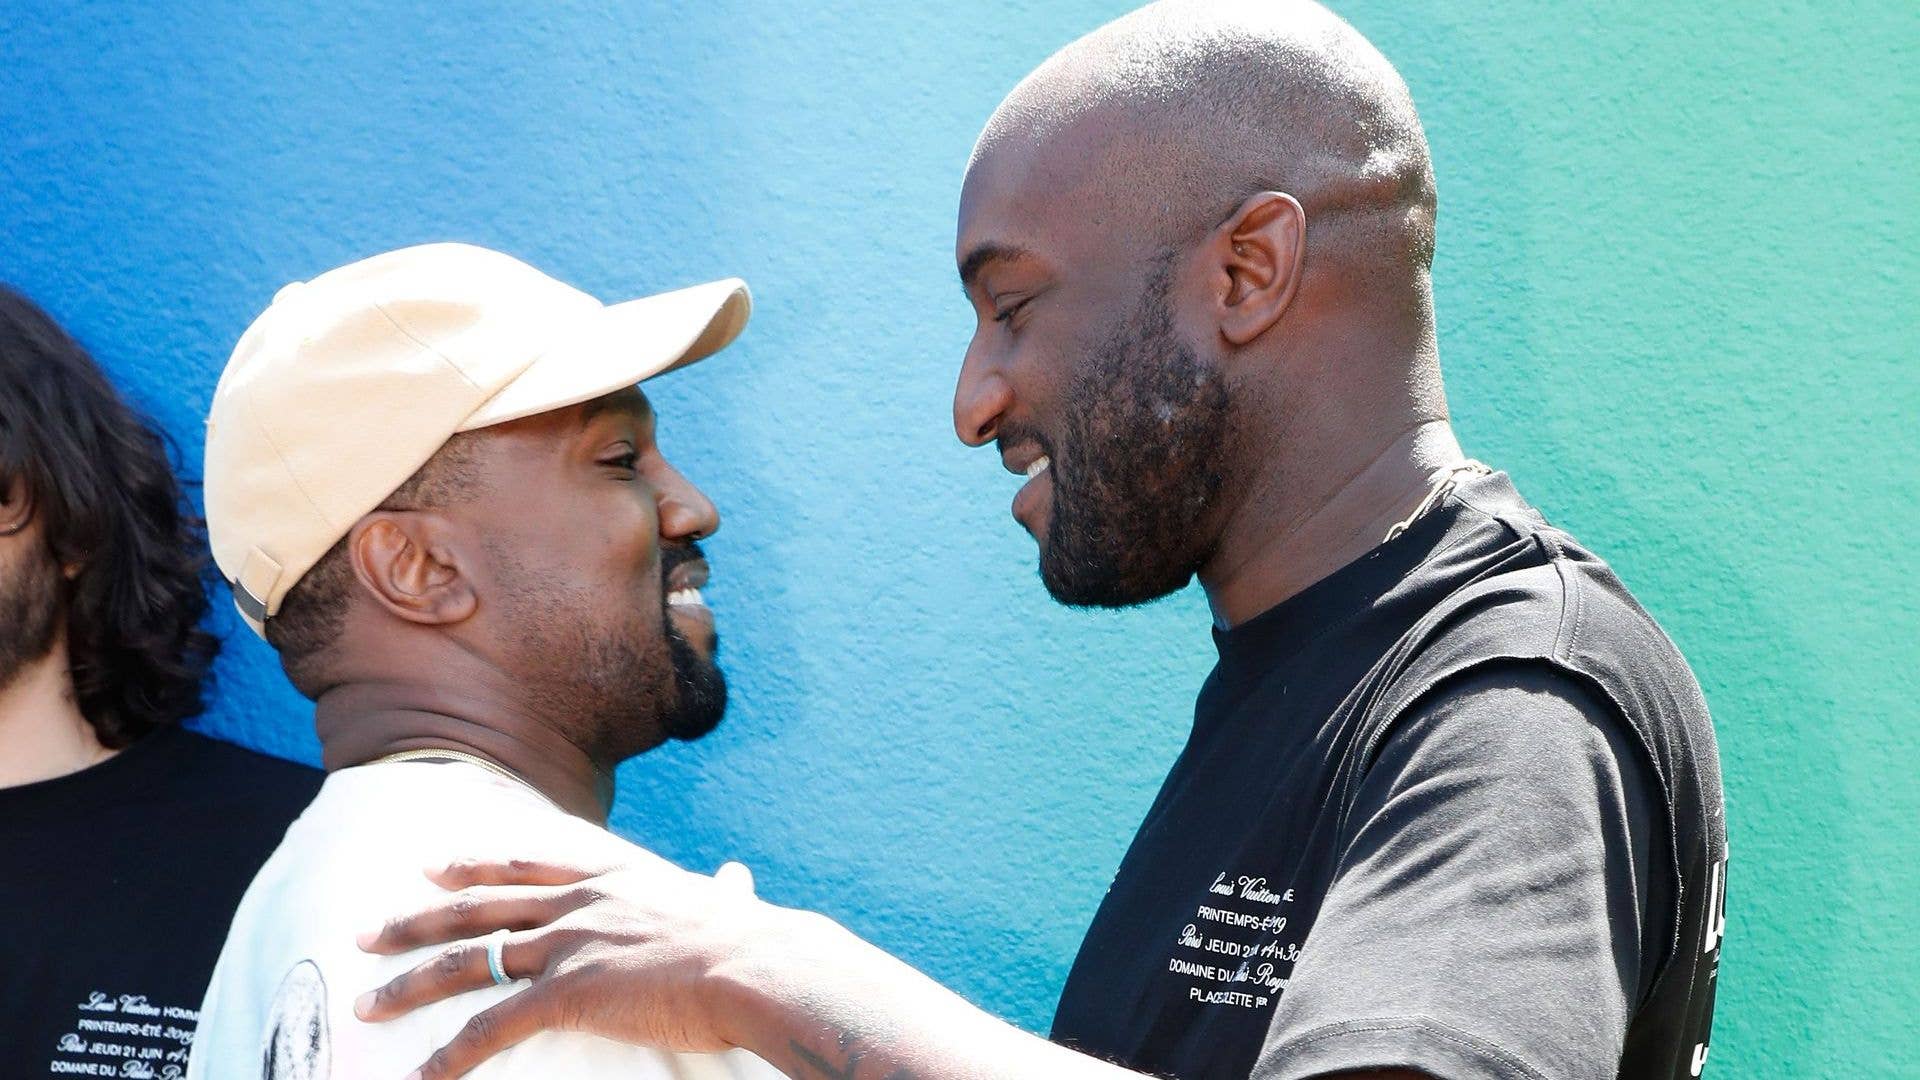 Kanye West collaborator Virgil Abloh: 'My brand started in the